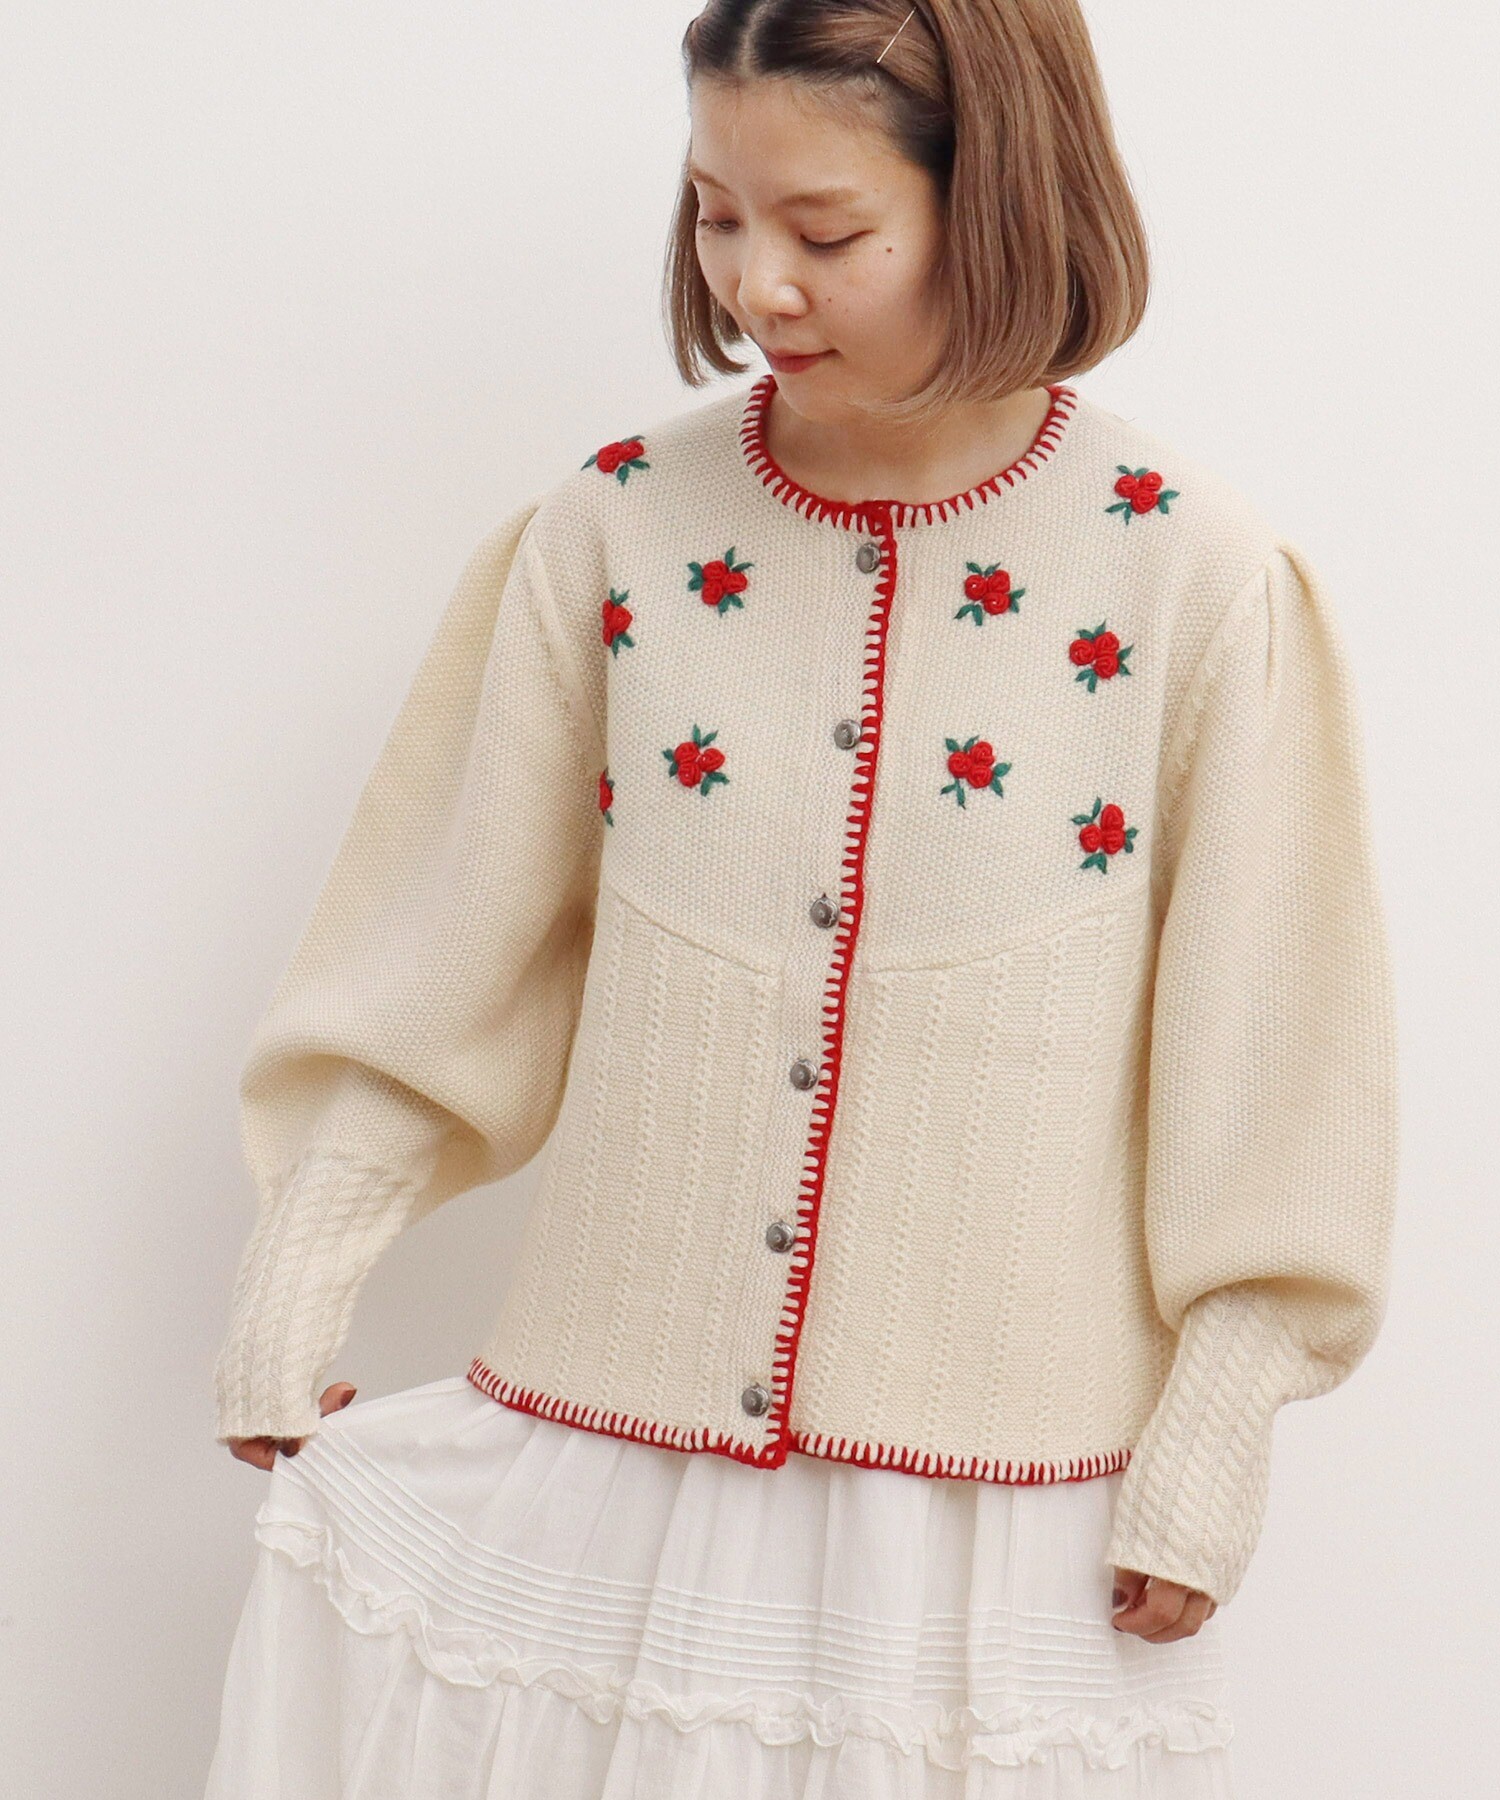 LIMI Feu 刺繍Message Embroidery 未使用品カーディガンMadeinJapan